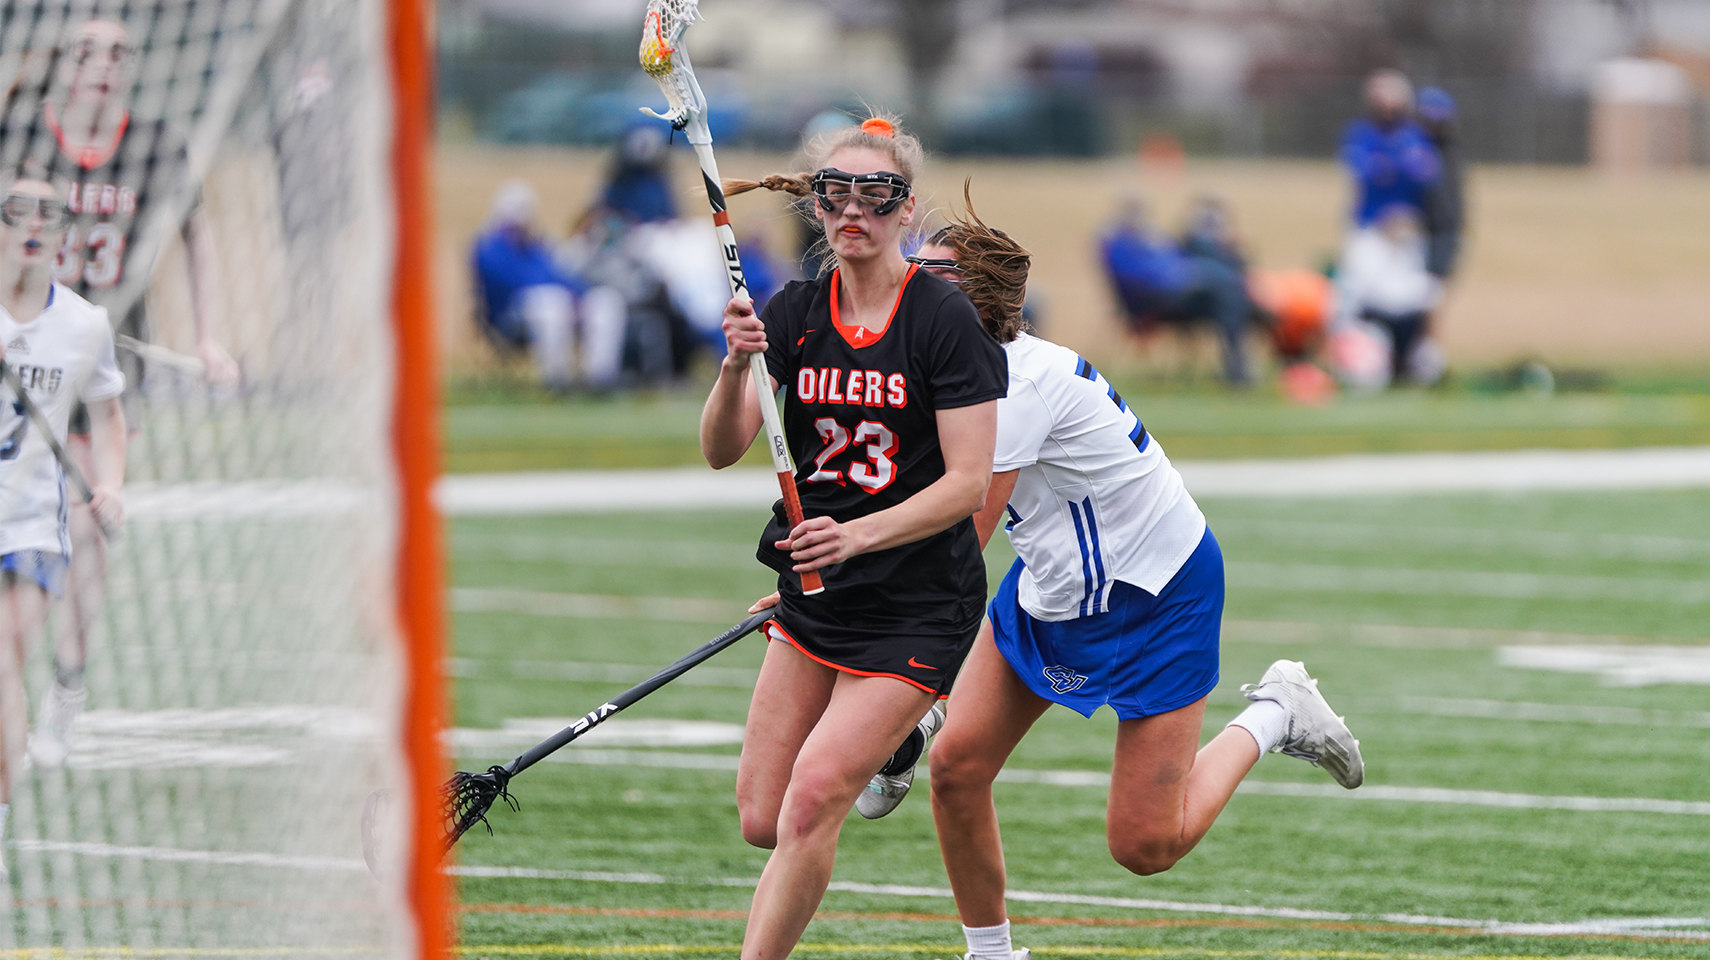 Women's lacrosse player in black shooting the ball